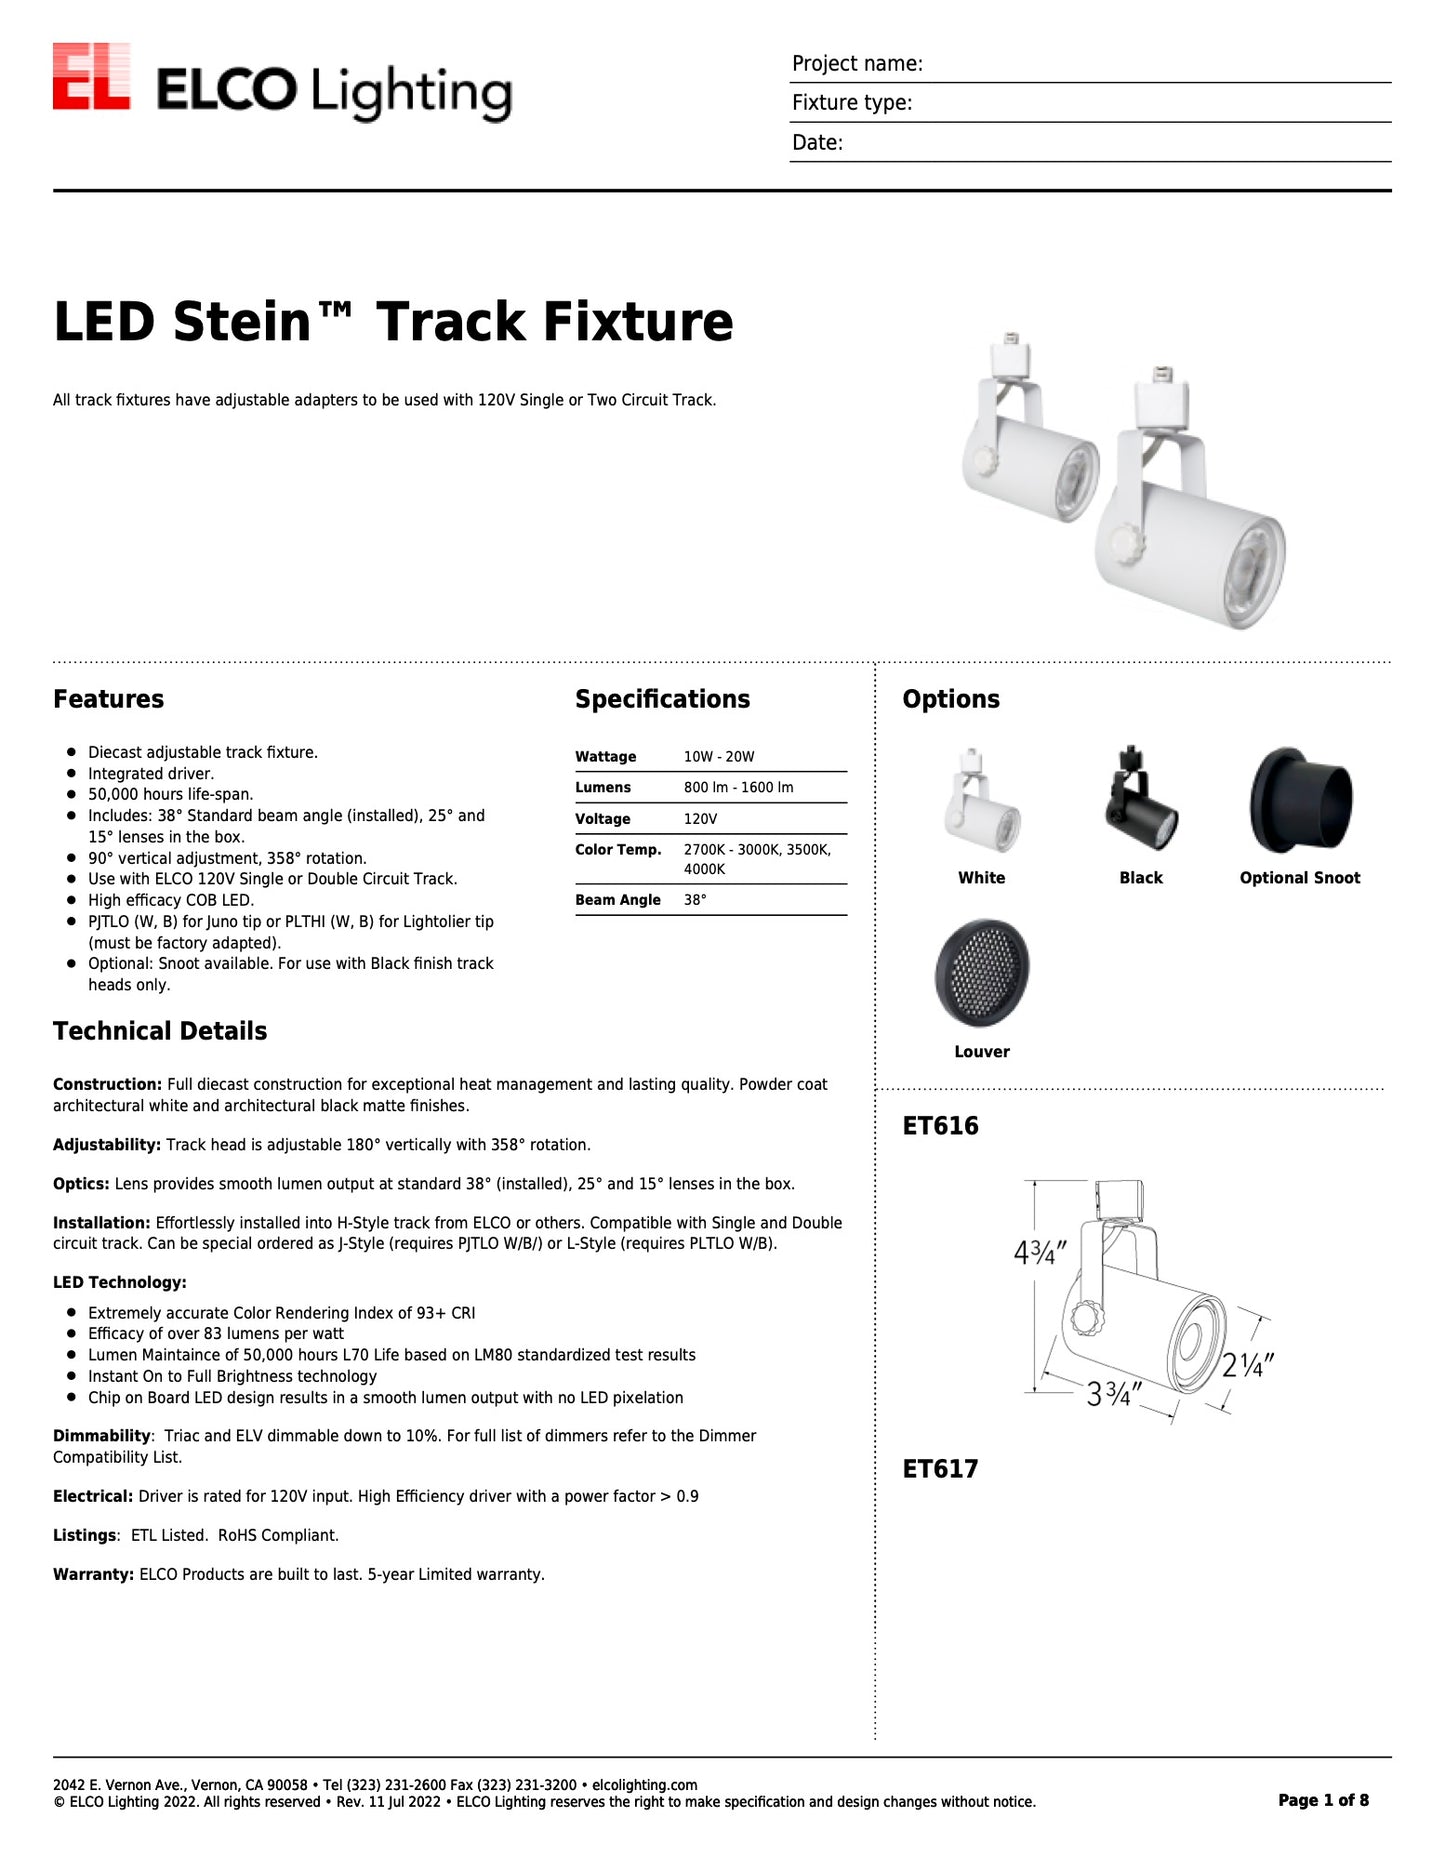 Elco LED Stein Track Fixture